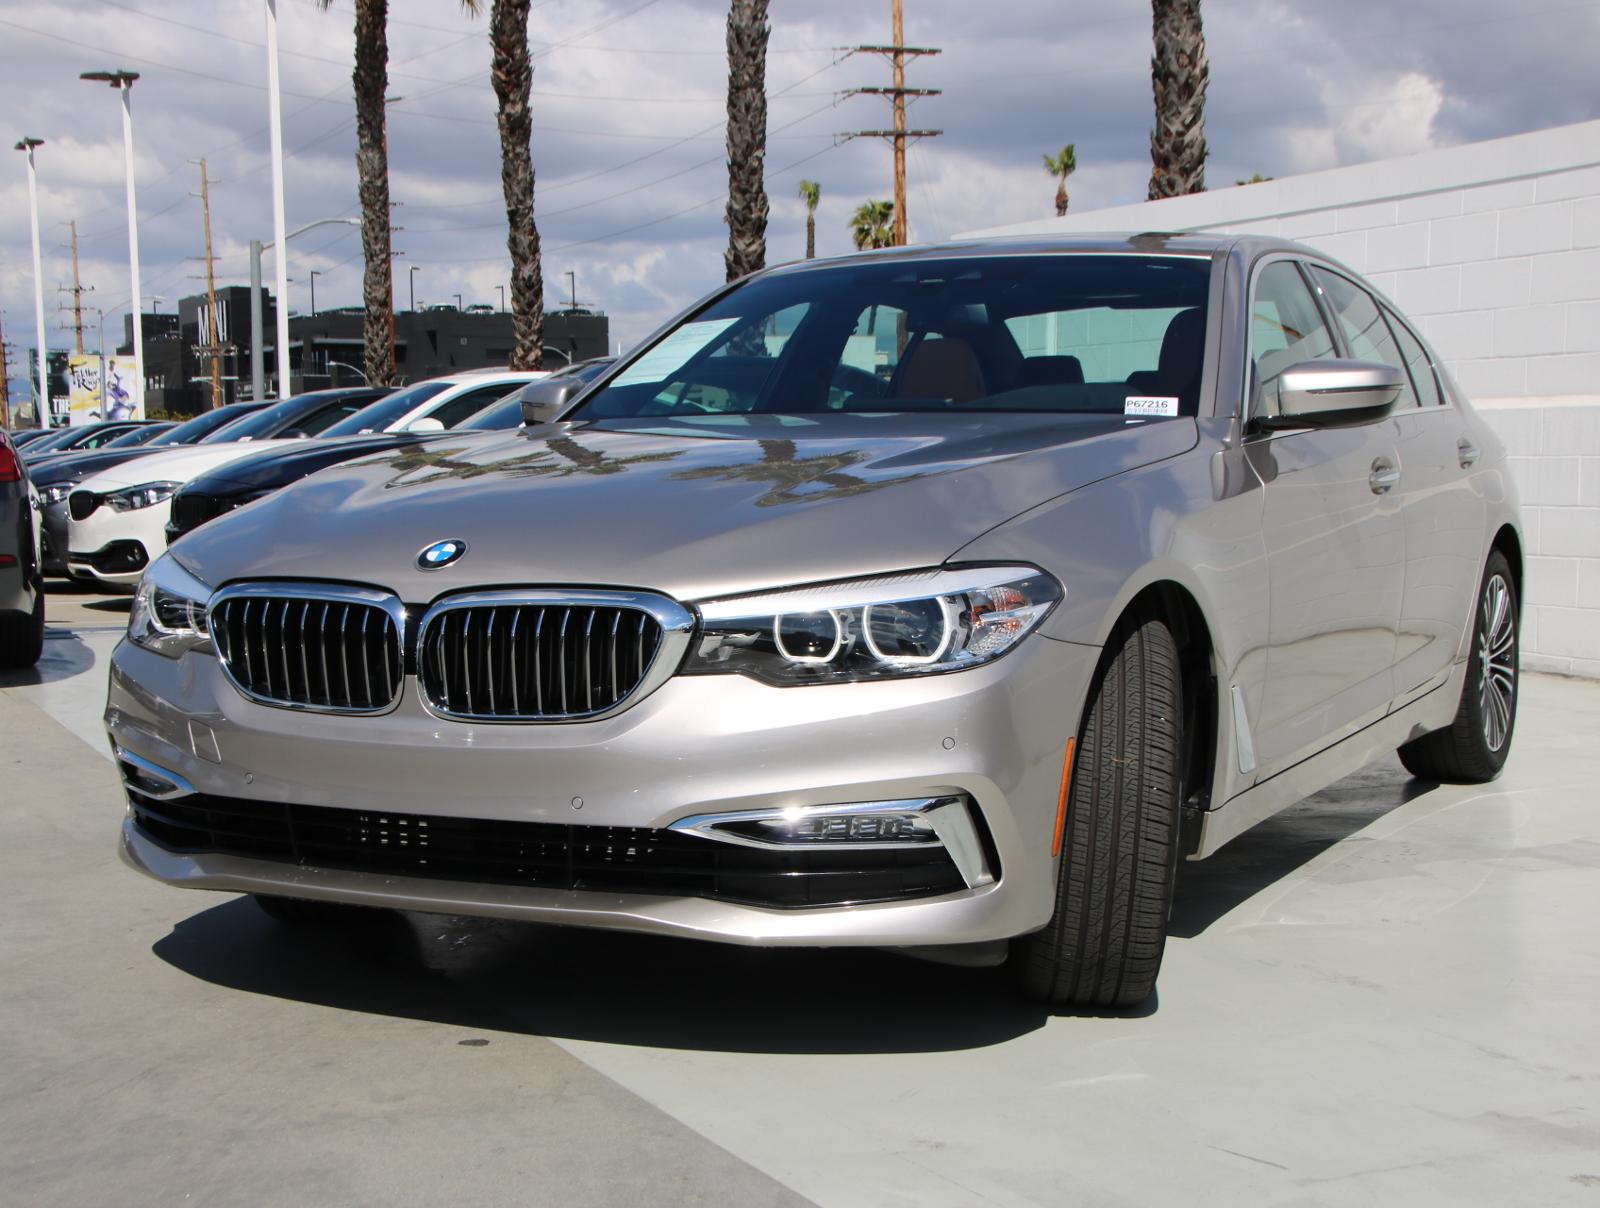 Pre-Owned 2018 BMW 5 Series 540i 540i Sedan in North Hollywood #P67216